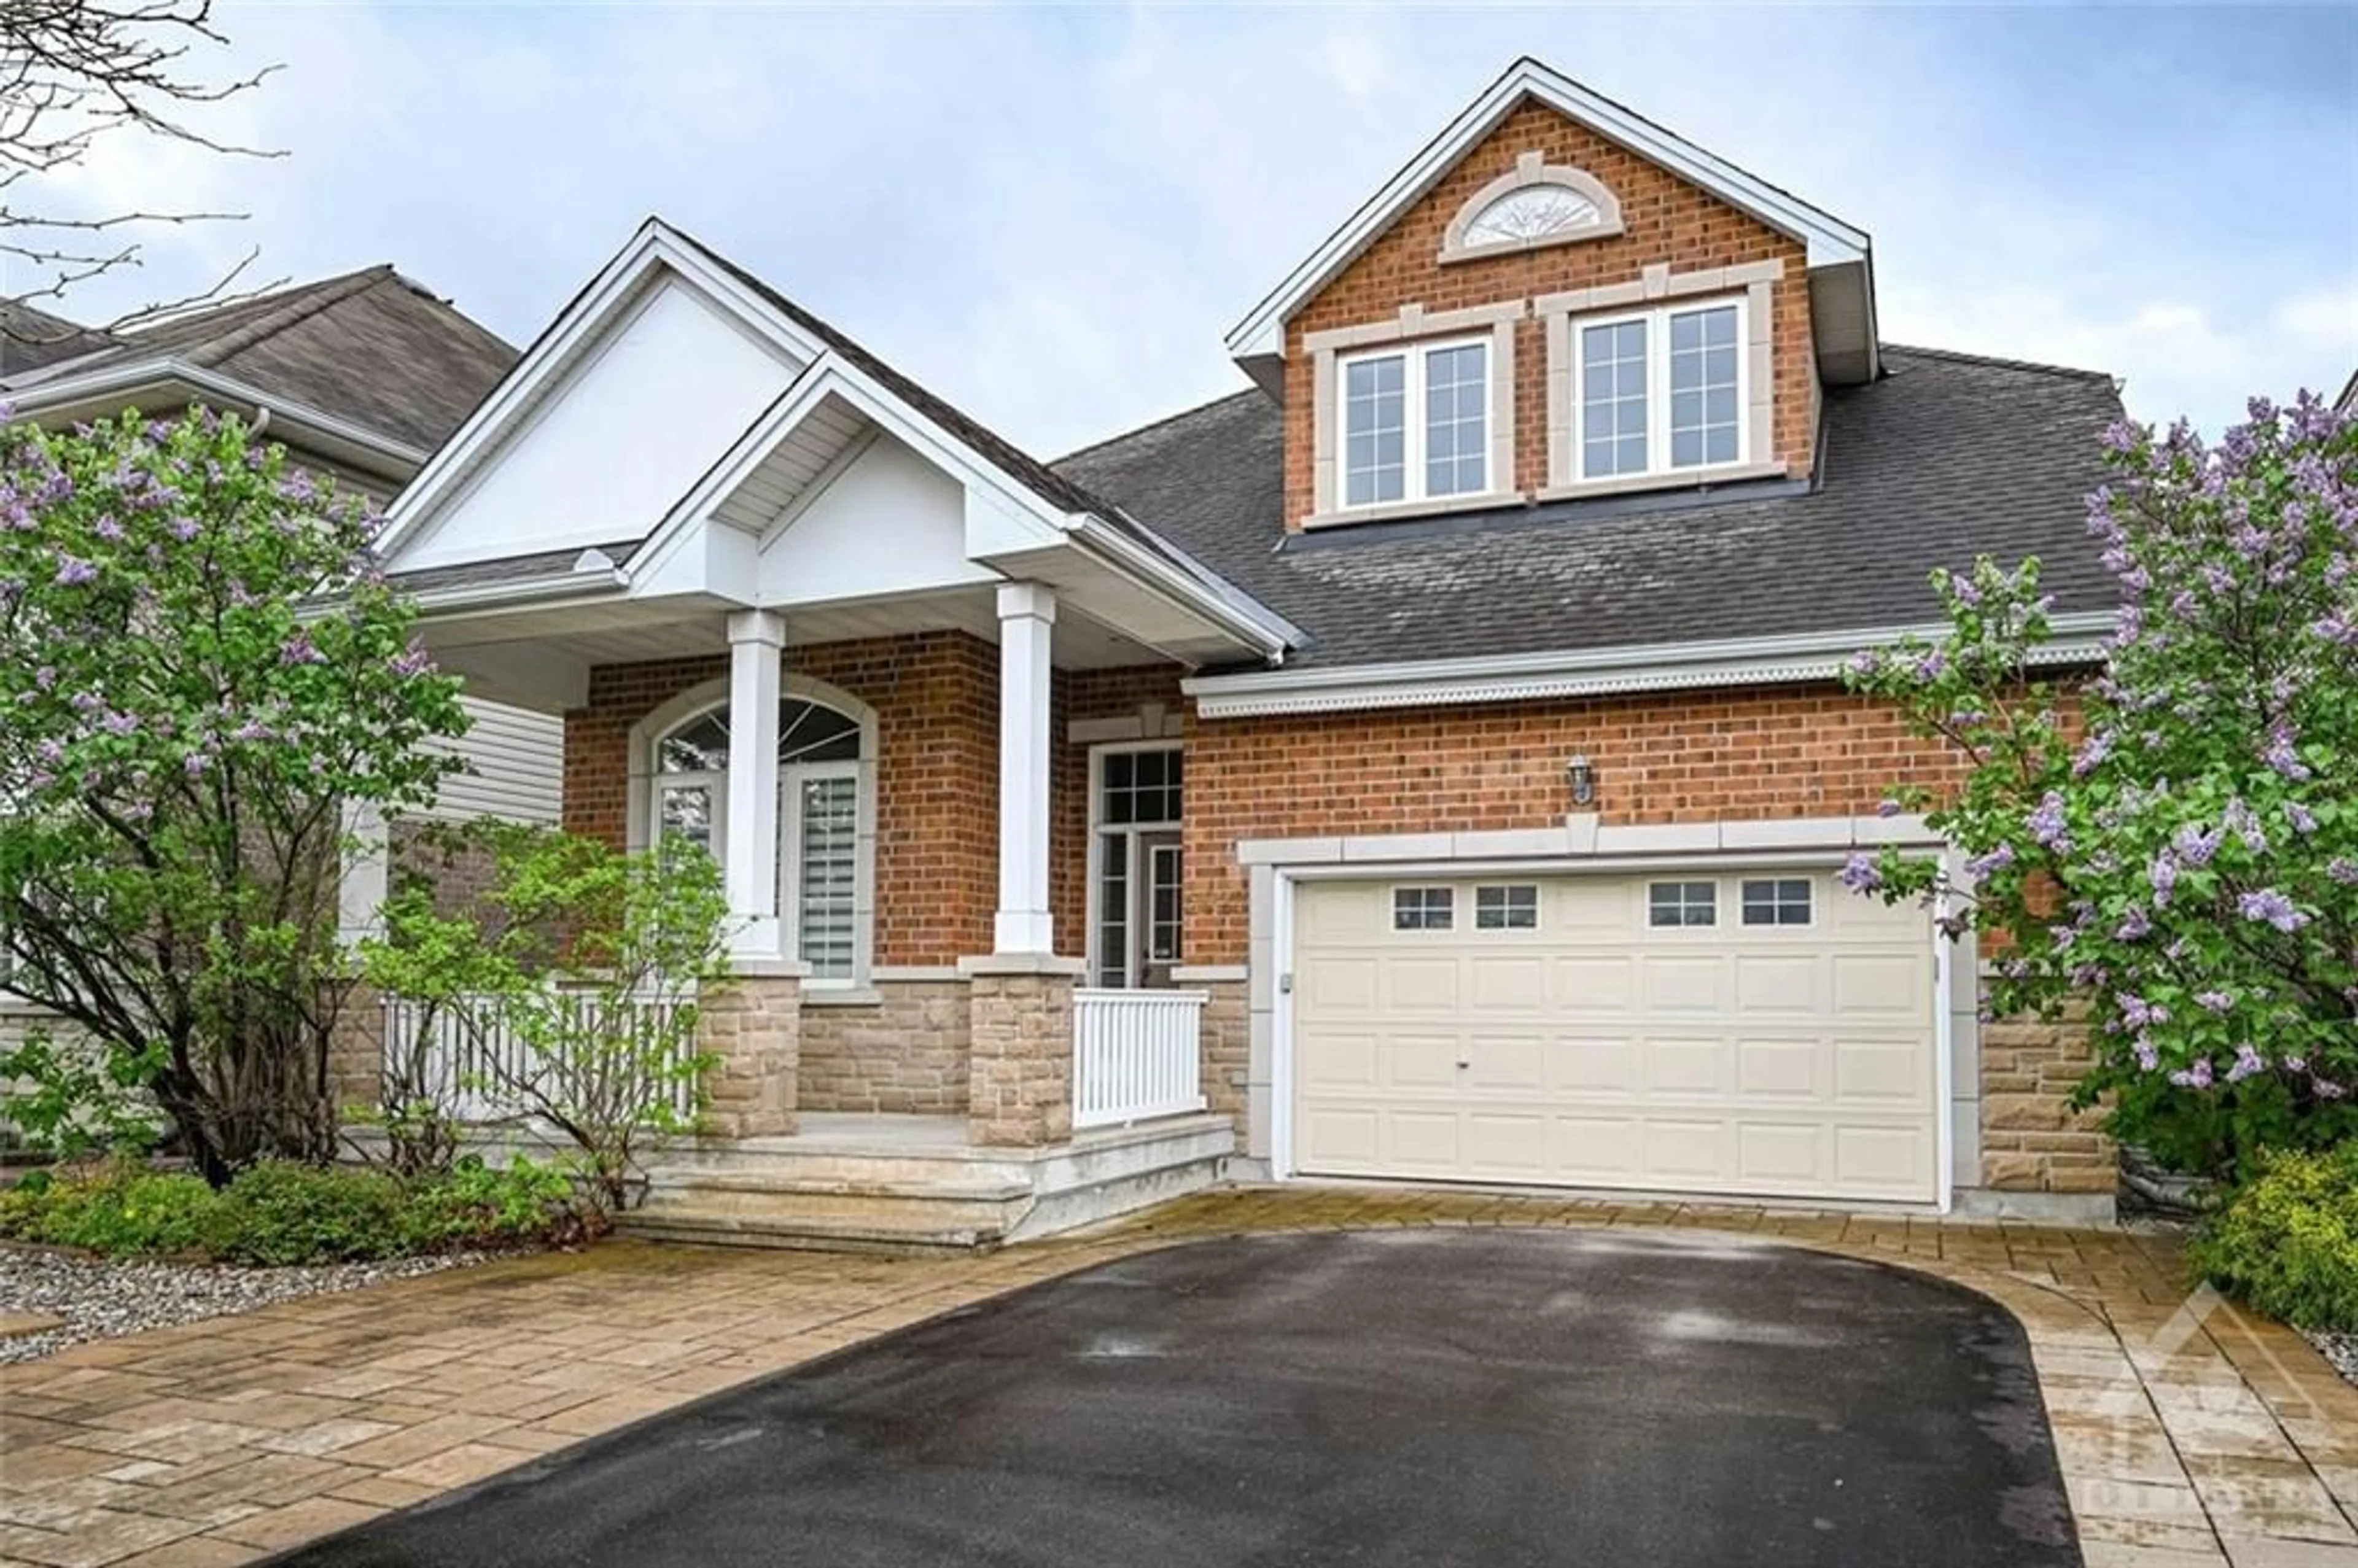 Home with brick exterior material for 5027 NORTH BLUFF Dr, Ottawa Ontario K1V 2H4